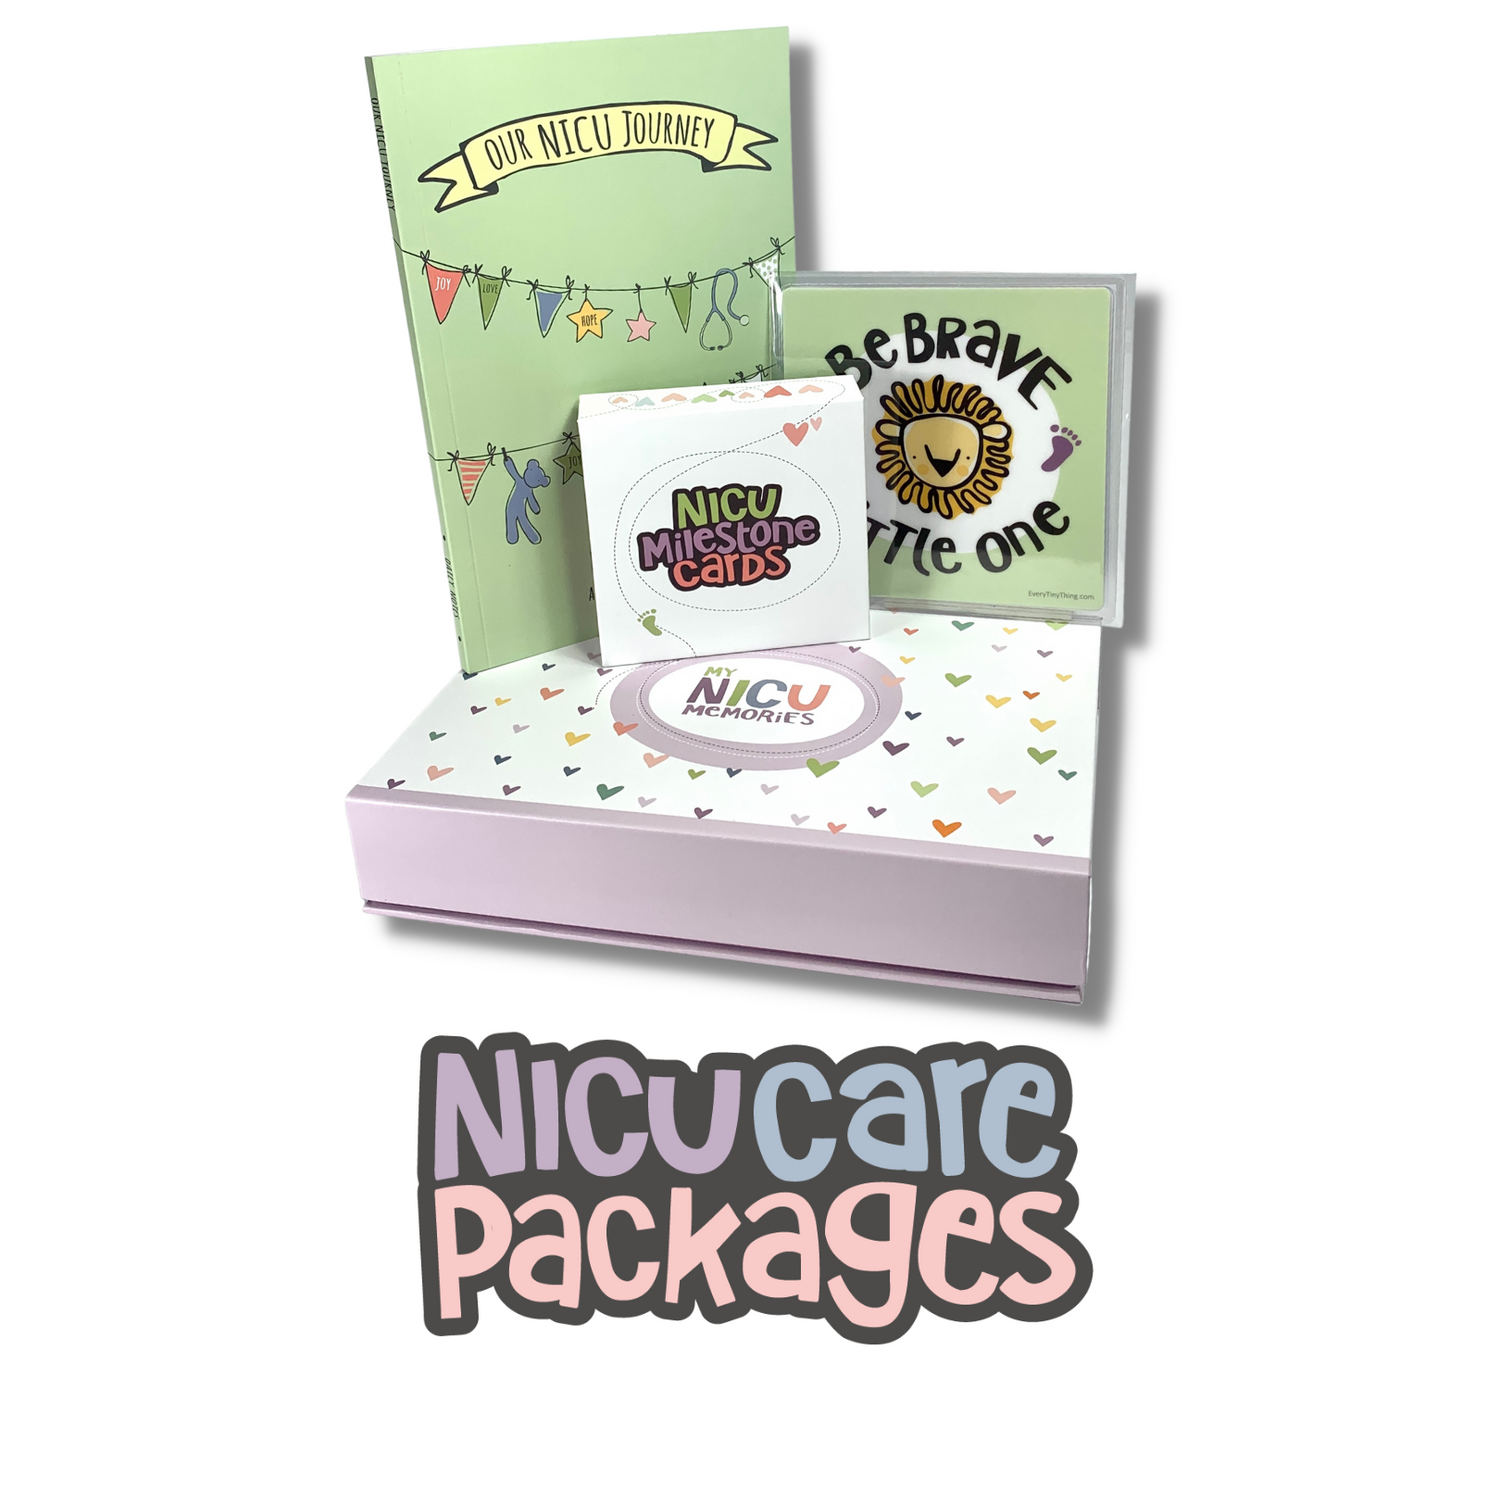 NICU Care Packages with a NICU journal, NICU art, NICU Milestone Cards and NICU Keepsake box. Shop for NICU-nurse curated and designed care packages by clicking this image.